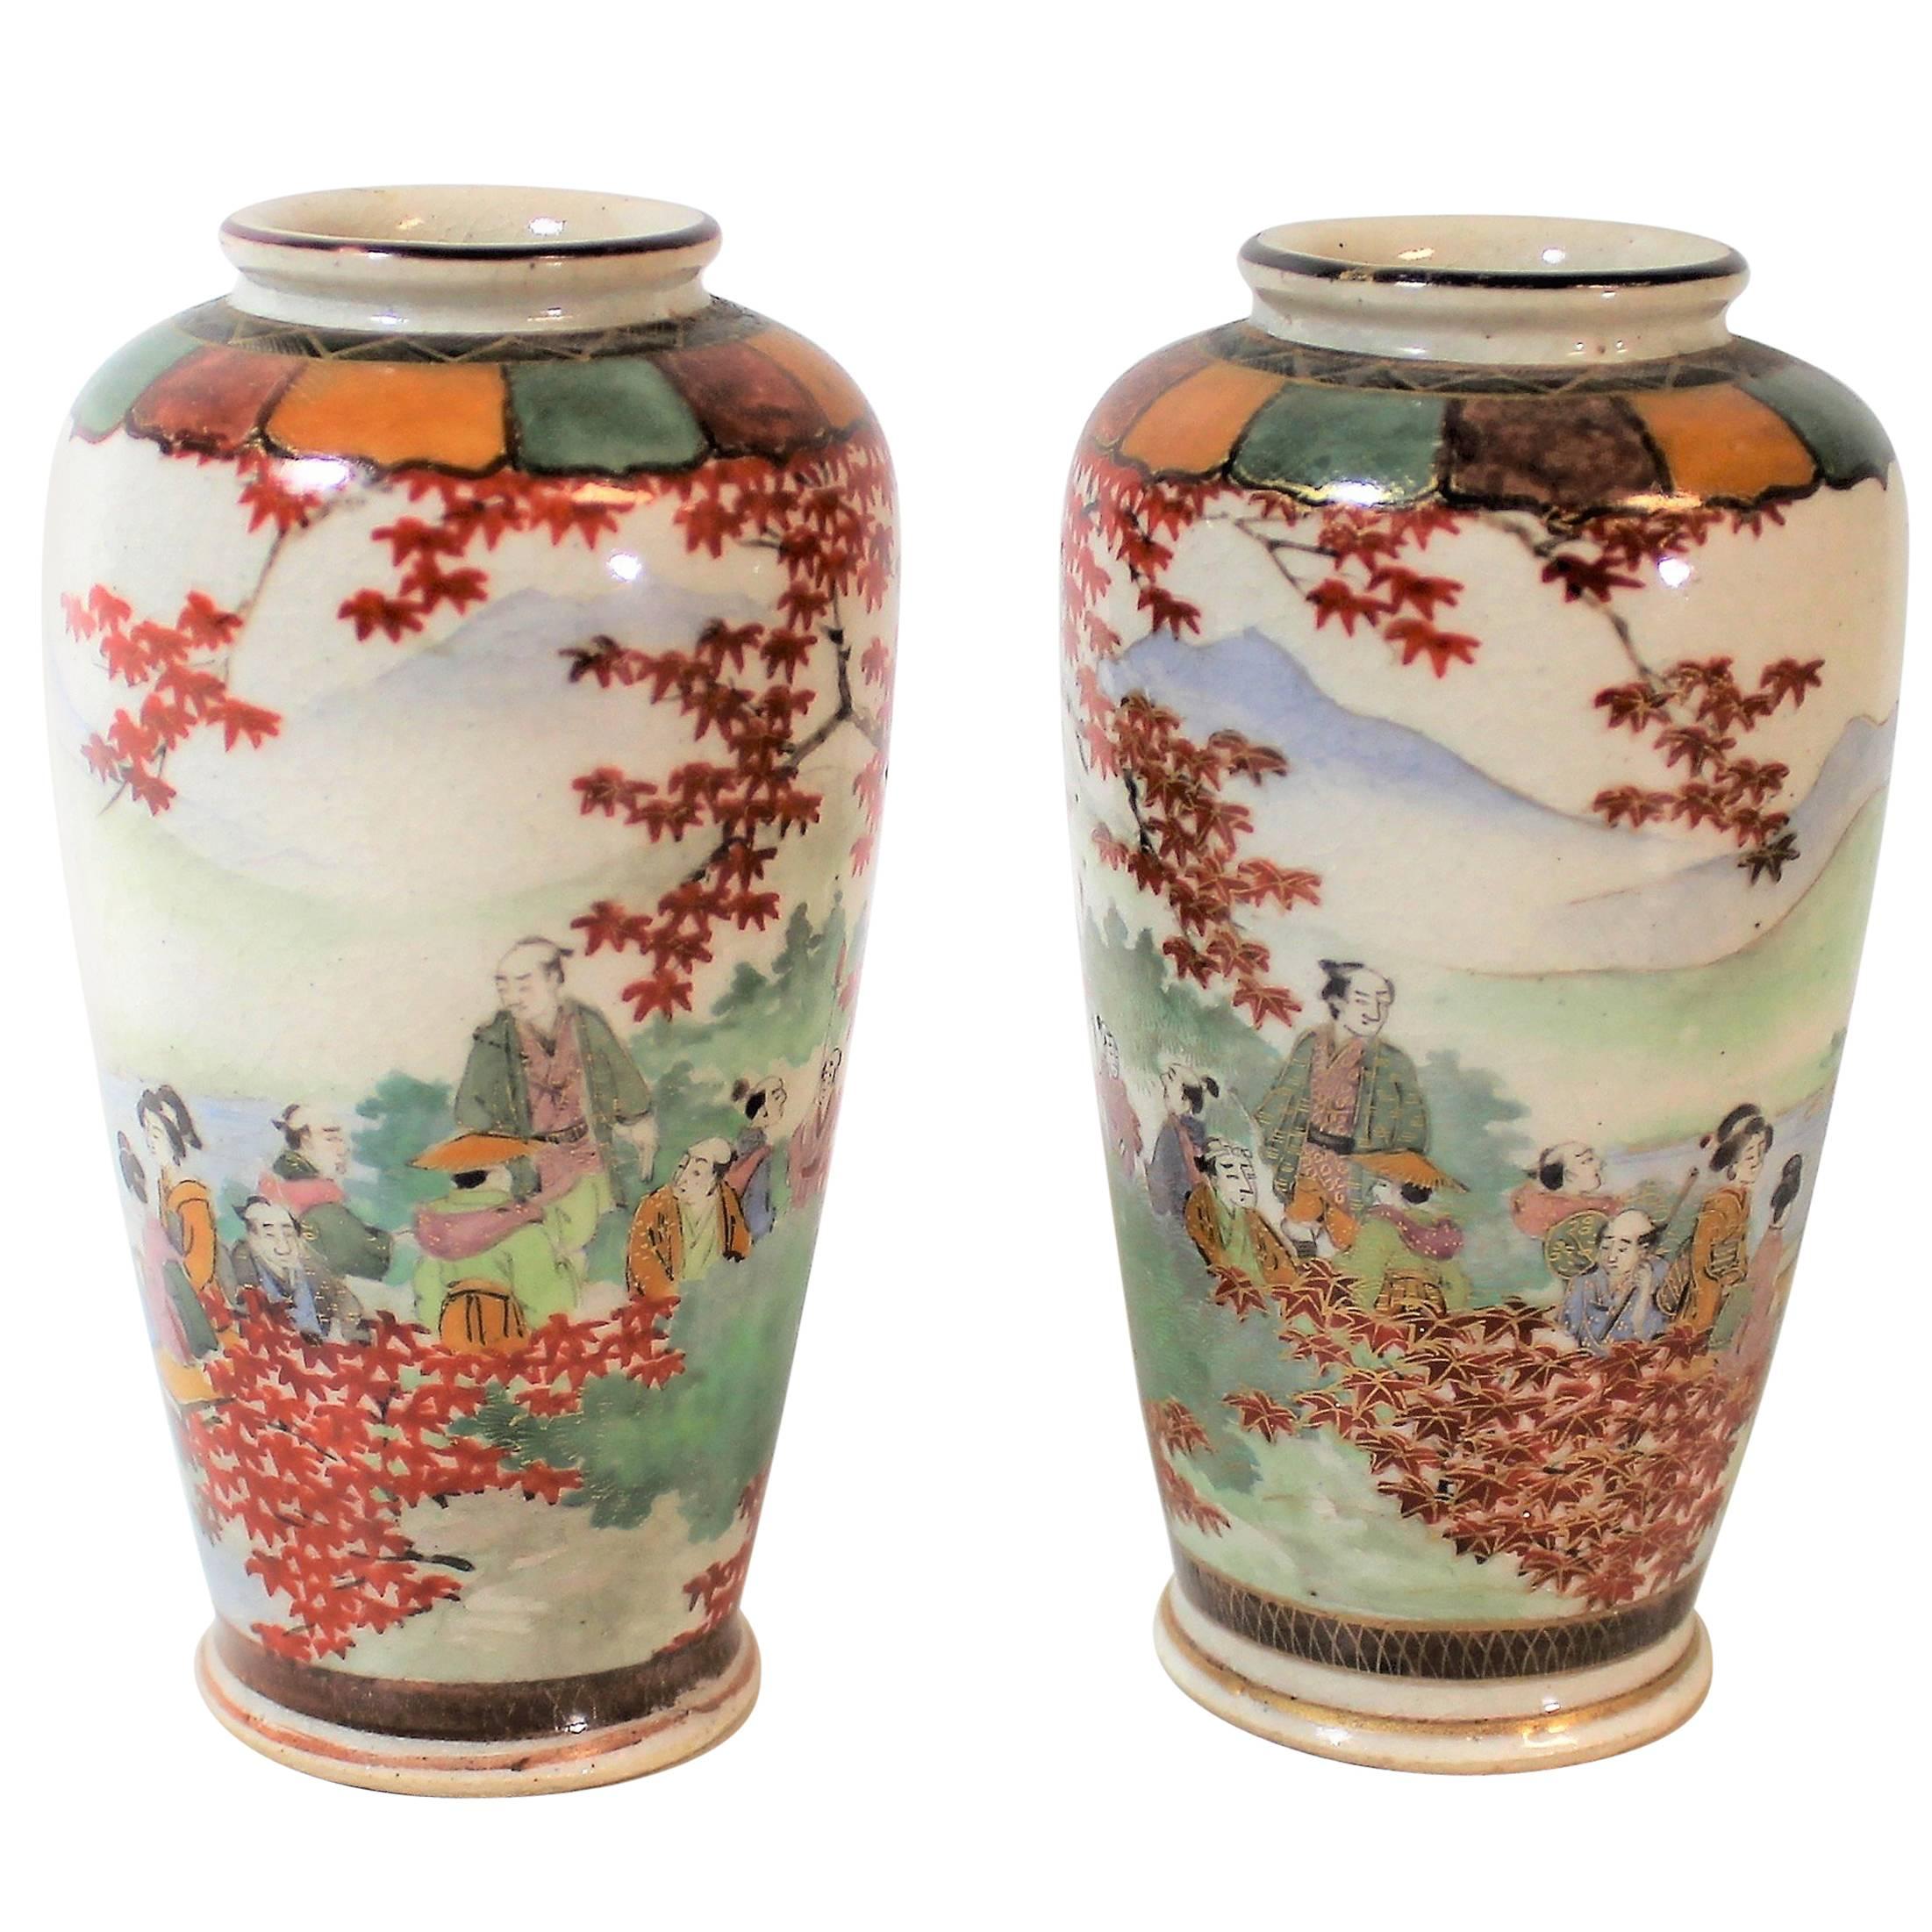 Pair of Japanese Meiji Period Hand-Painted Porcelain Vases